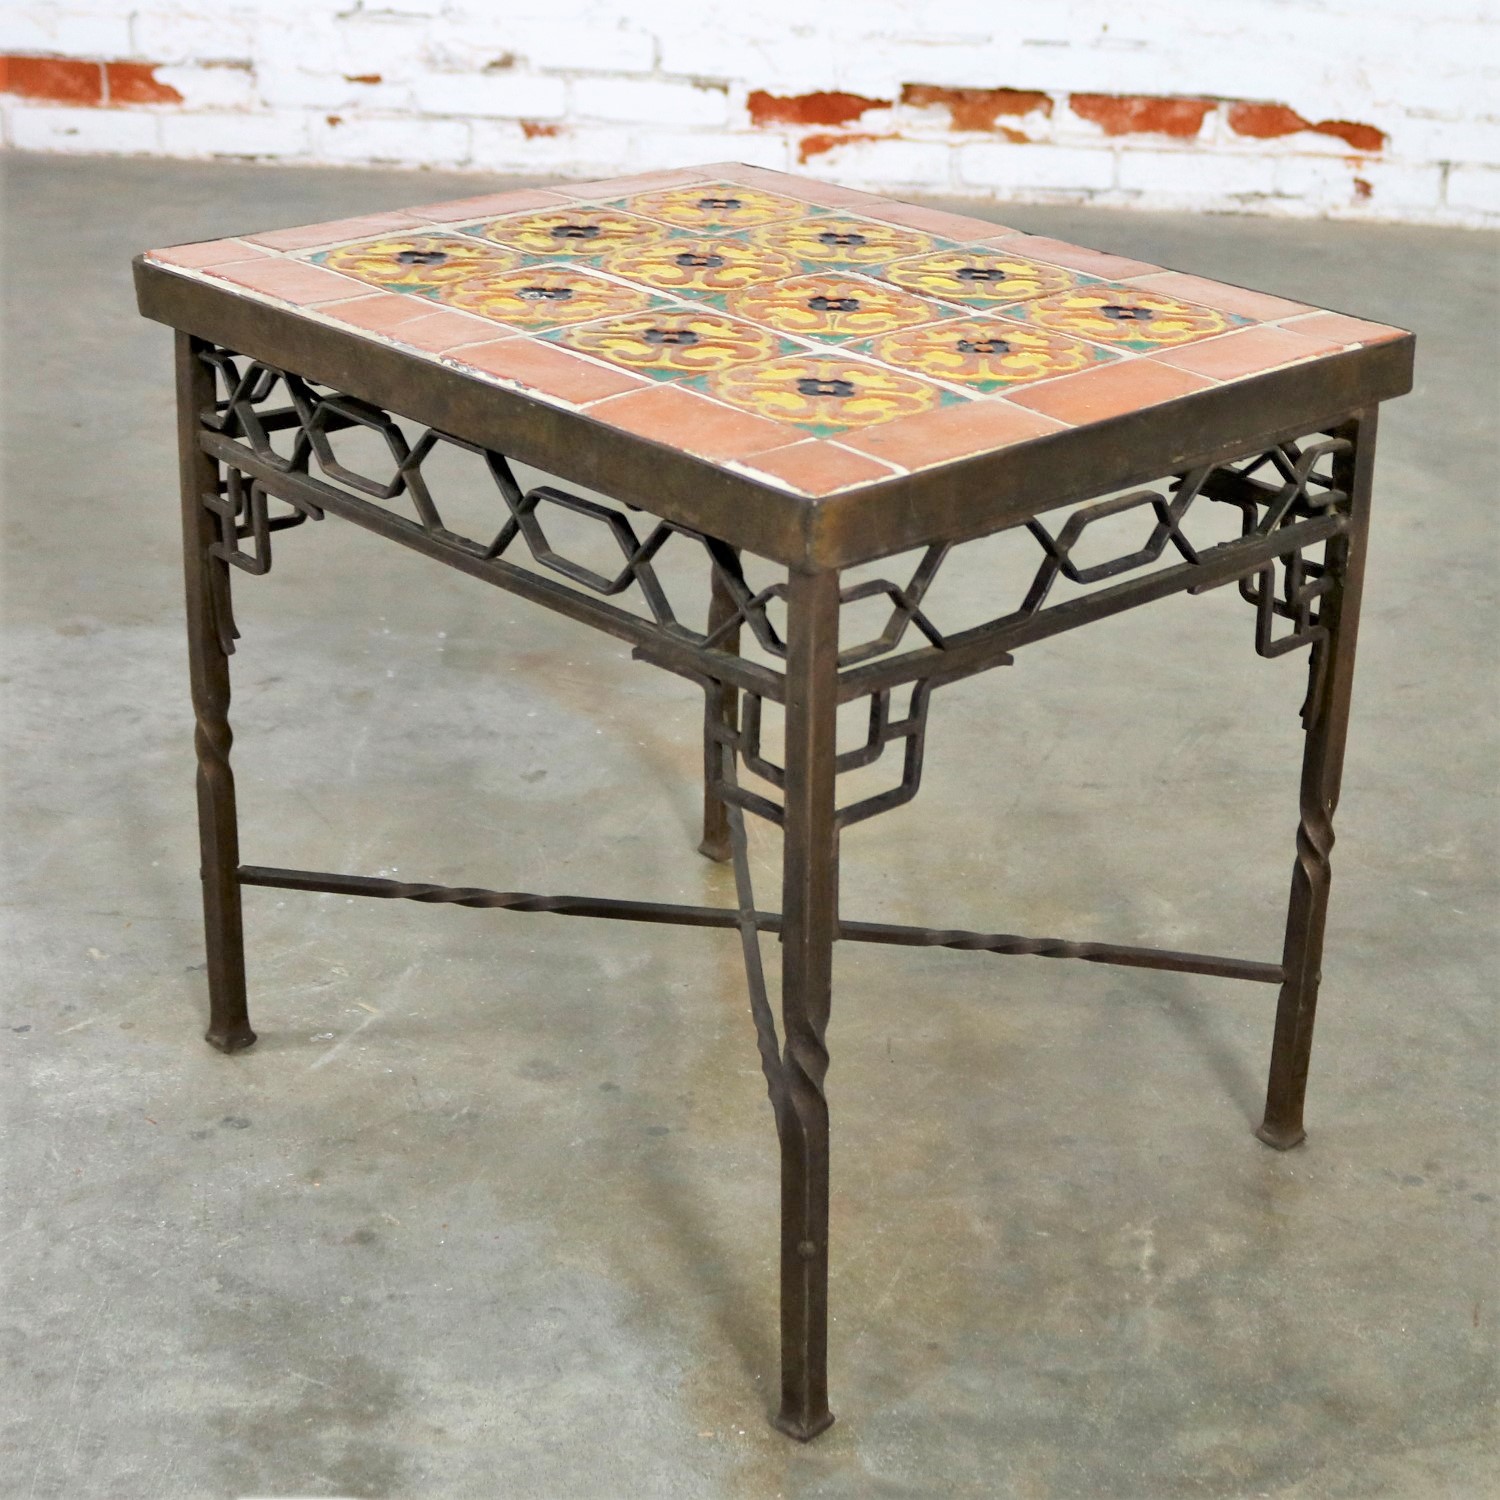 Art Deco Wrought Iron and Tile Side Table California Style Tiles